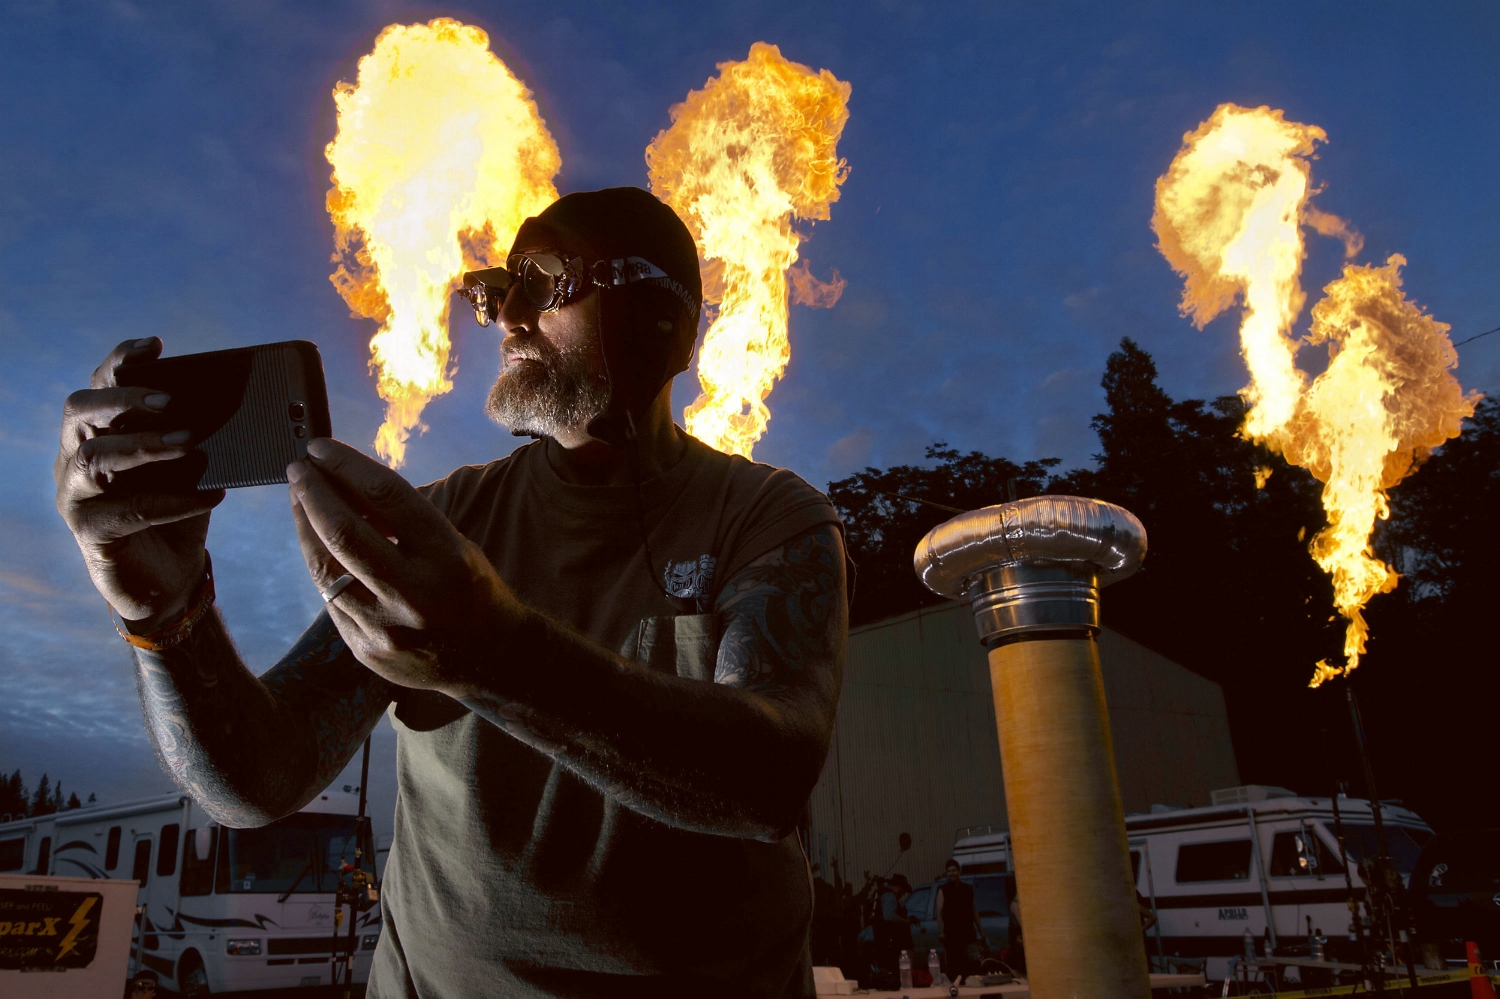  "Wild" Bill Hill takes a photo of himself in front of large bursts of fire during the 'Fire and Steel' event in Colfax on Saturday, June 14, 2014 